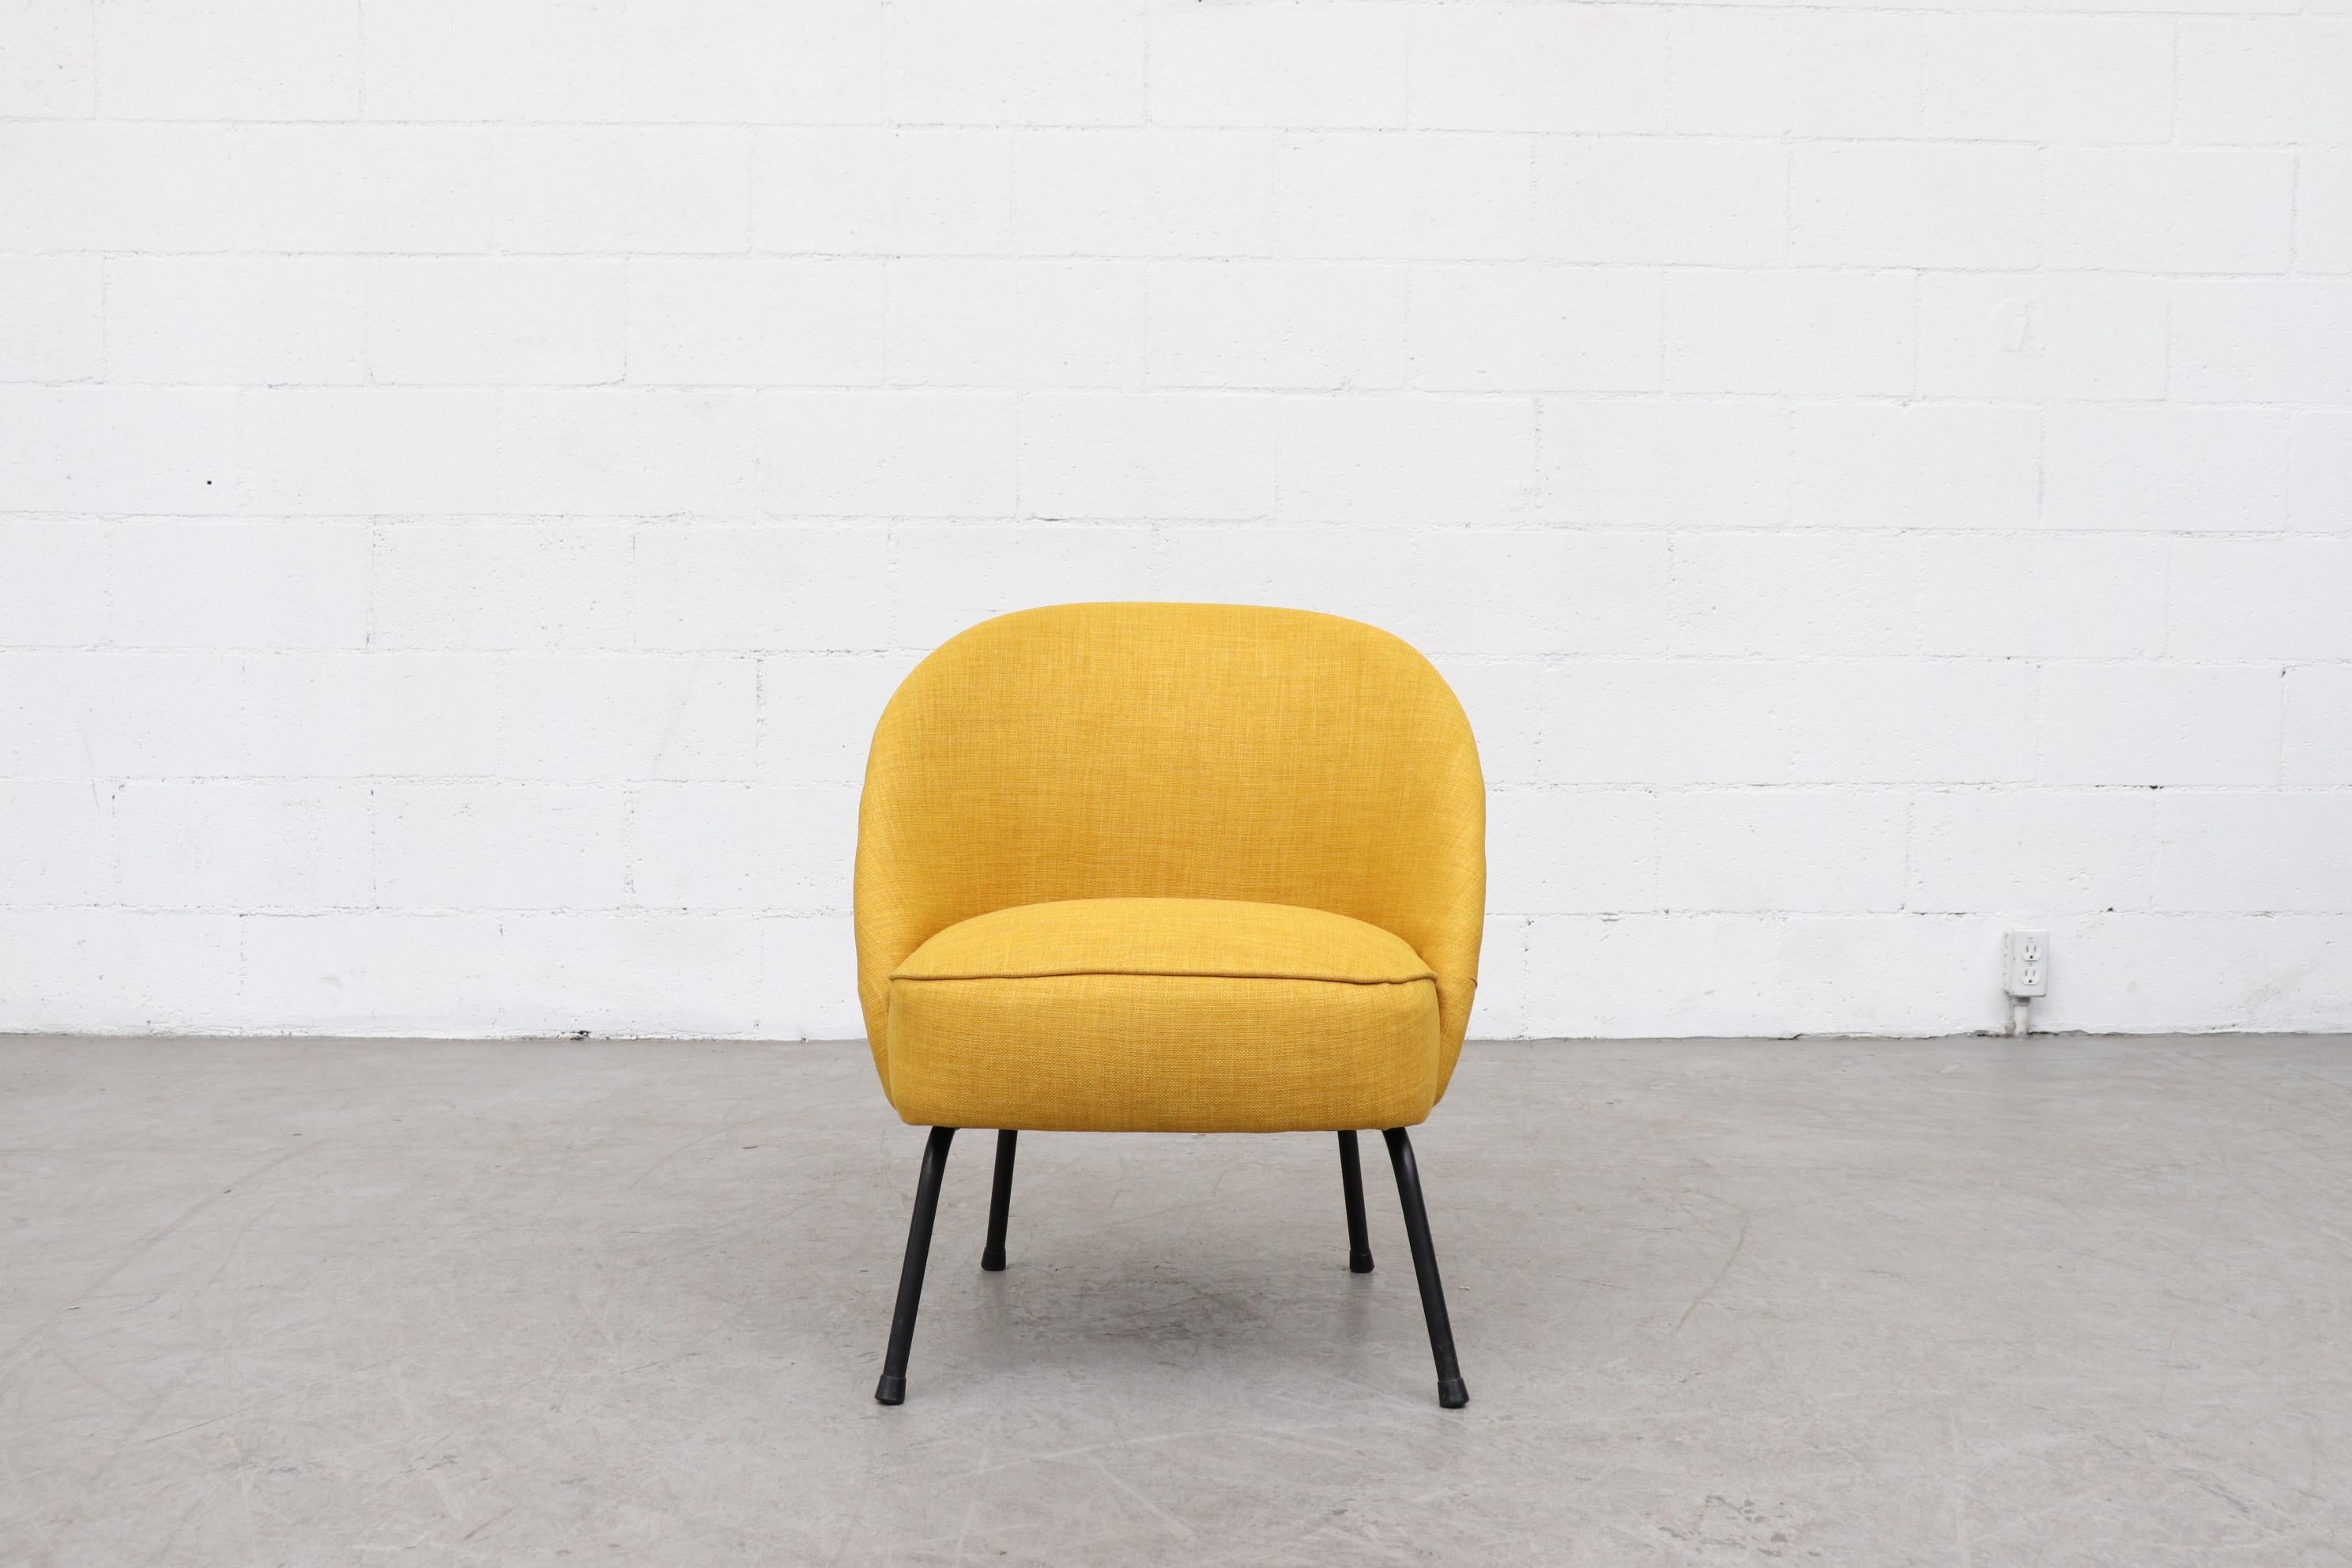 Sweet little chair in new sunshine yellow upholstery with black enameled metal legs. Small stature, frame in original condition with some signs of wear.